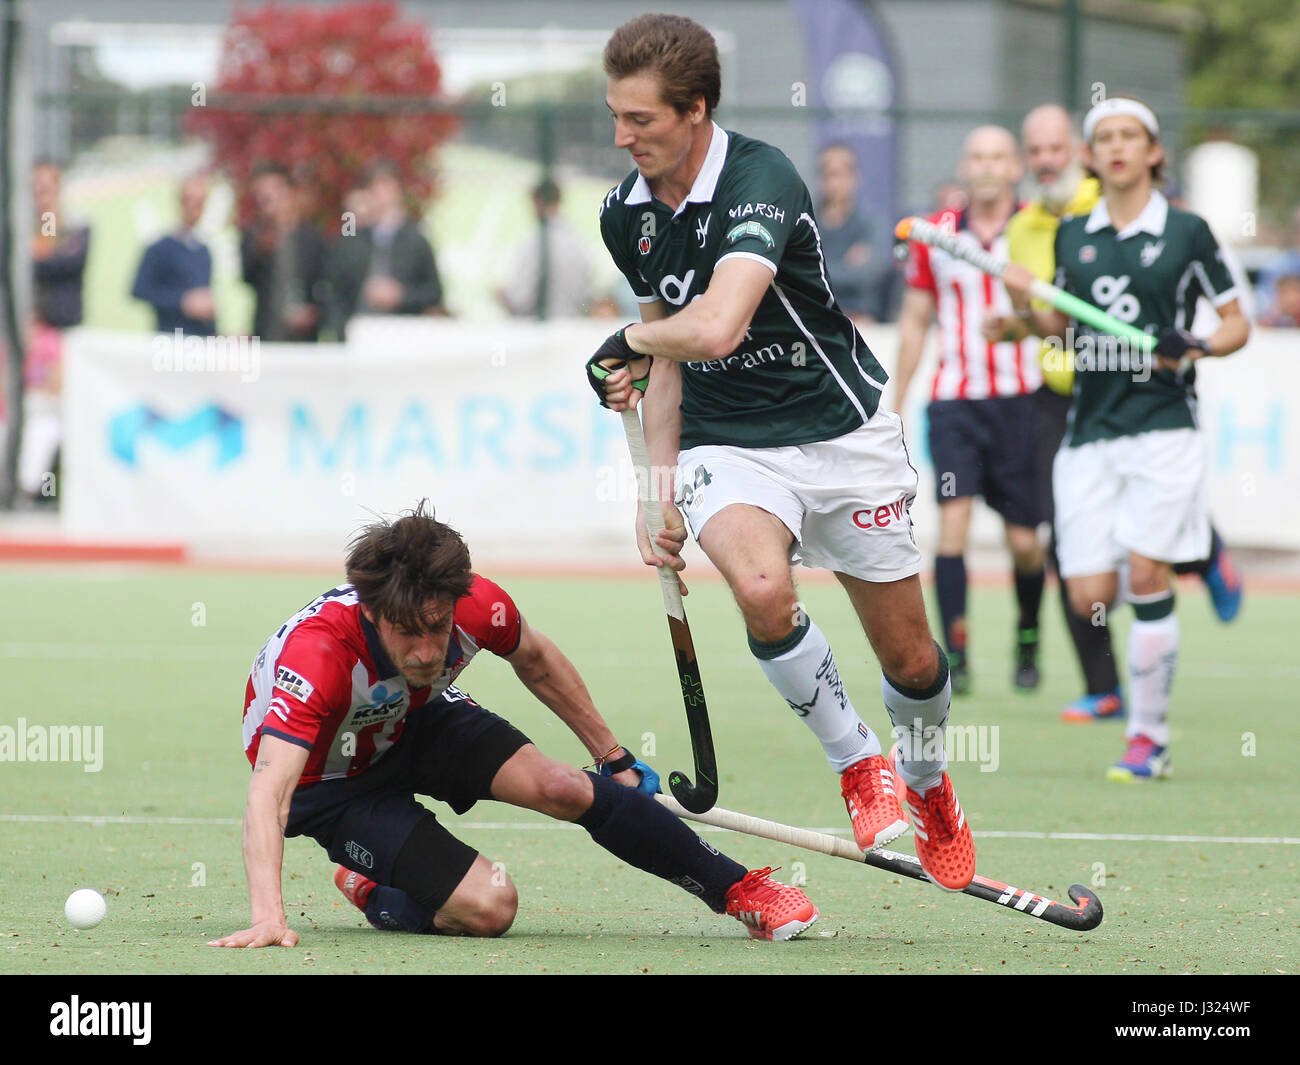 Waterloo, Belgium. 01st May, 2017. Honor Mens National League Antoine Kina of Waterloo in game action, during the match Waterloo Ducks-Leopold. Credit: Leo Cavallo/Alamy Live News Stock Photo